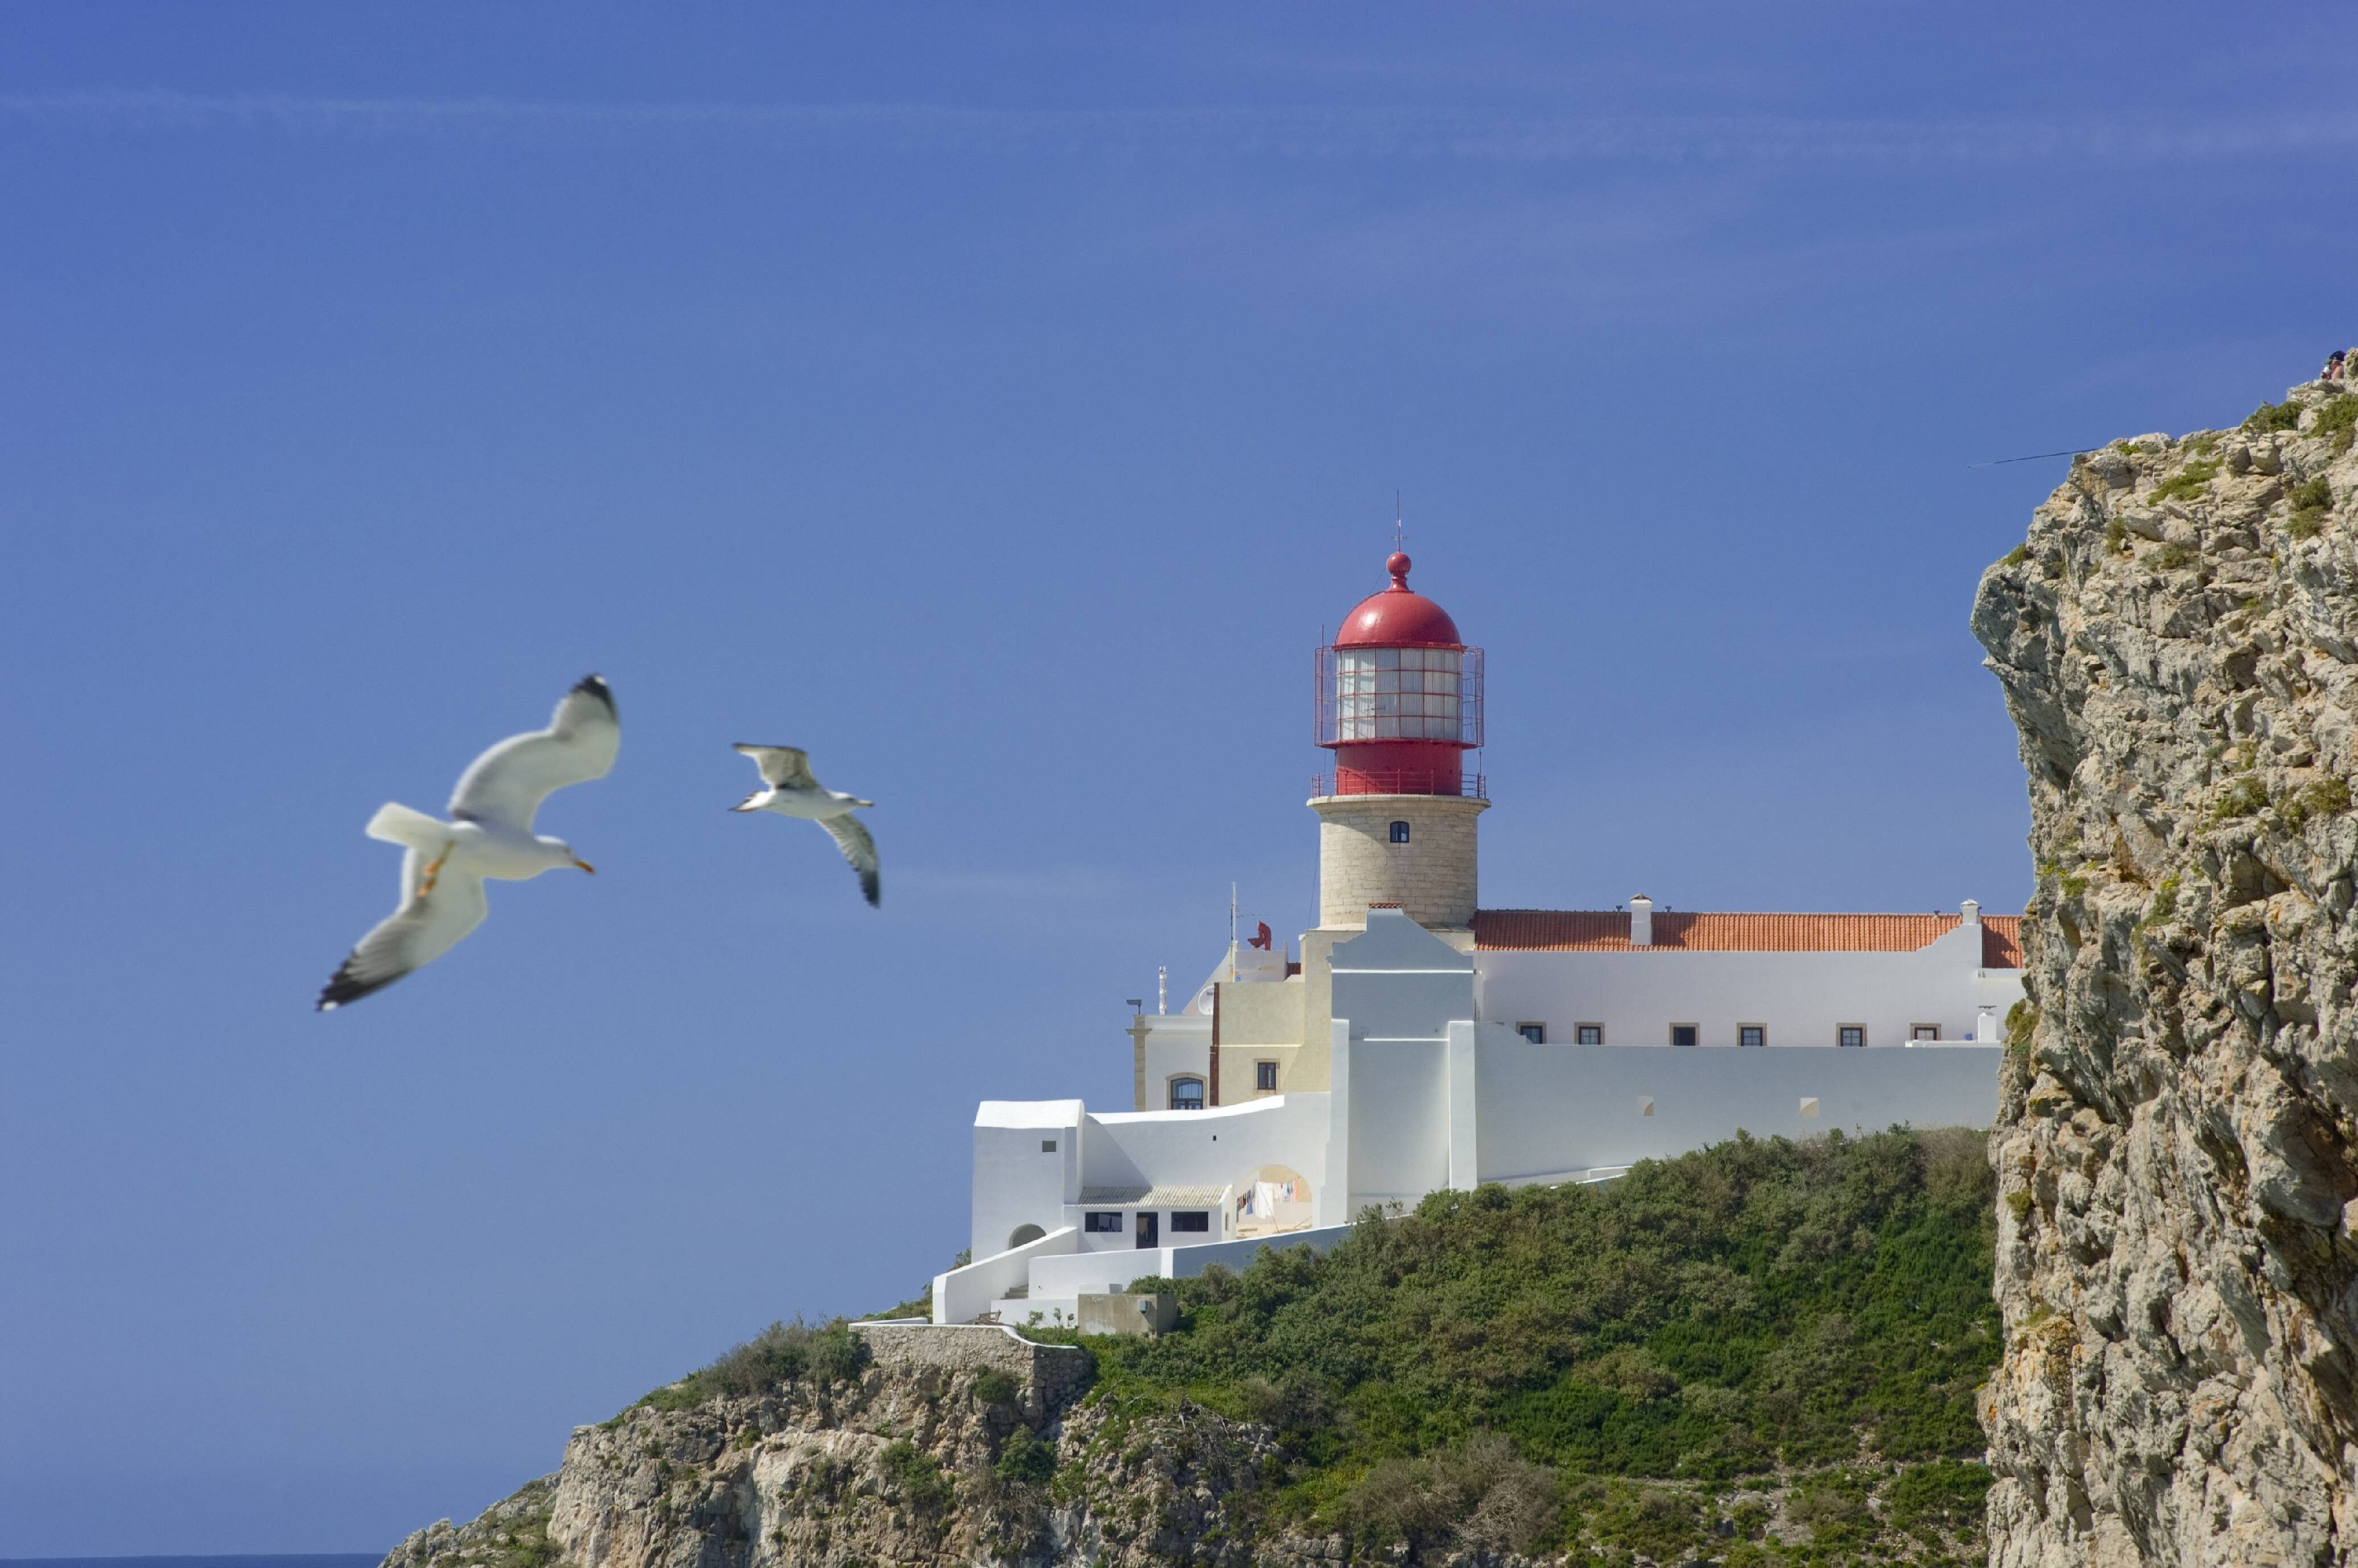 Because of the terrorist attacks in Europe, the demand for real estate has shifted to Portugal